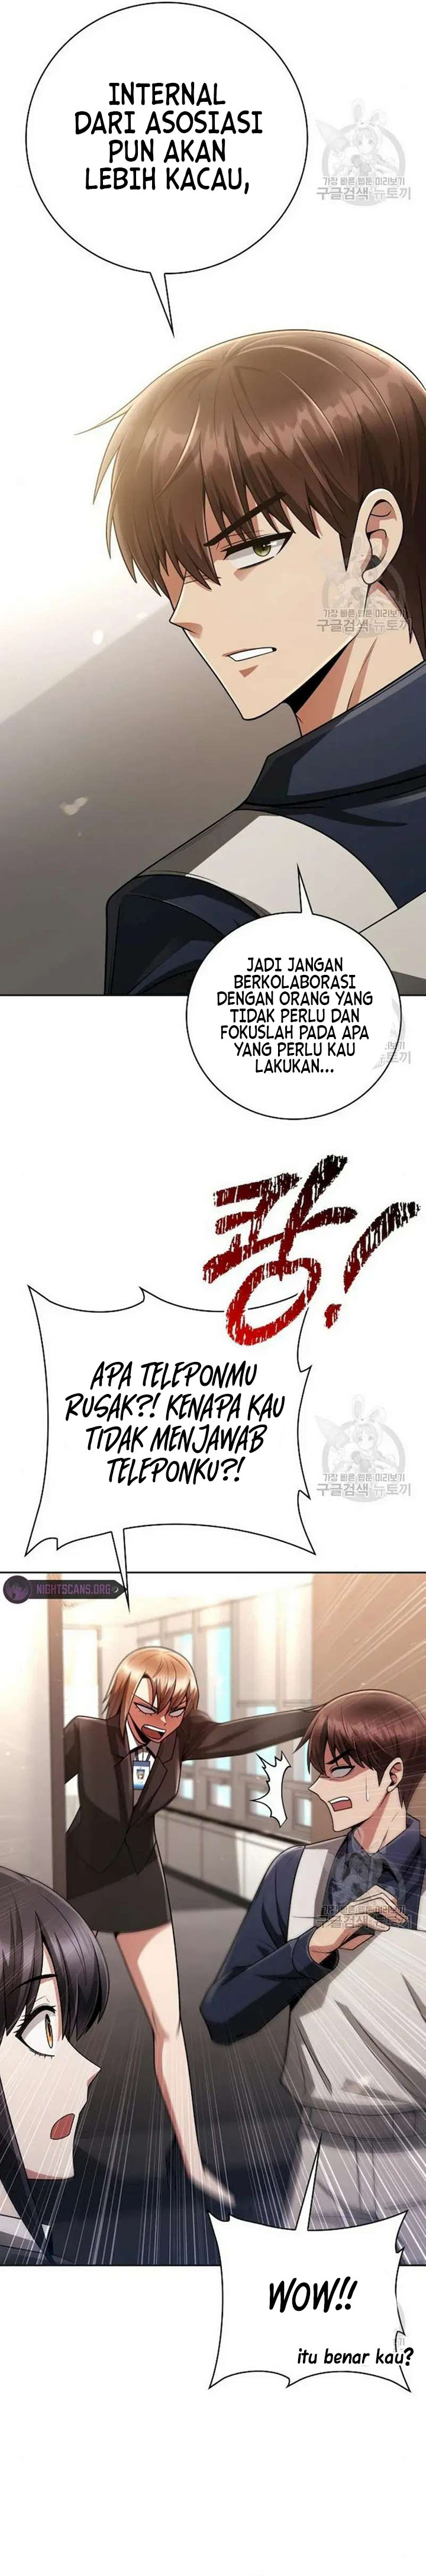 Dilarang COPAS - situs resmi www.mangacanblog.com - Komik clever cleaning life of the returned genius hunter 041 - chapter 41 42 Indonesia clever cleaning life of the returned genius hunter 041 - chapter 41 Terbaru 20|Baca Manga Komik Indonesia|Mangacan